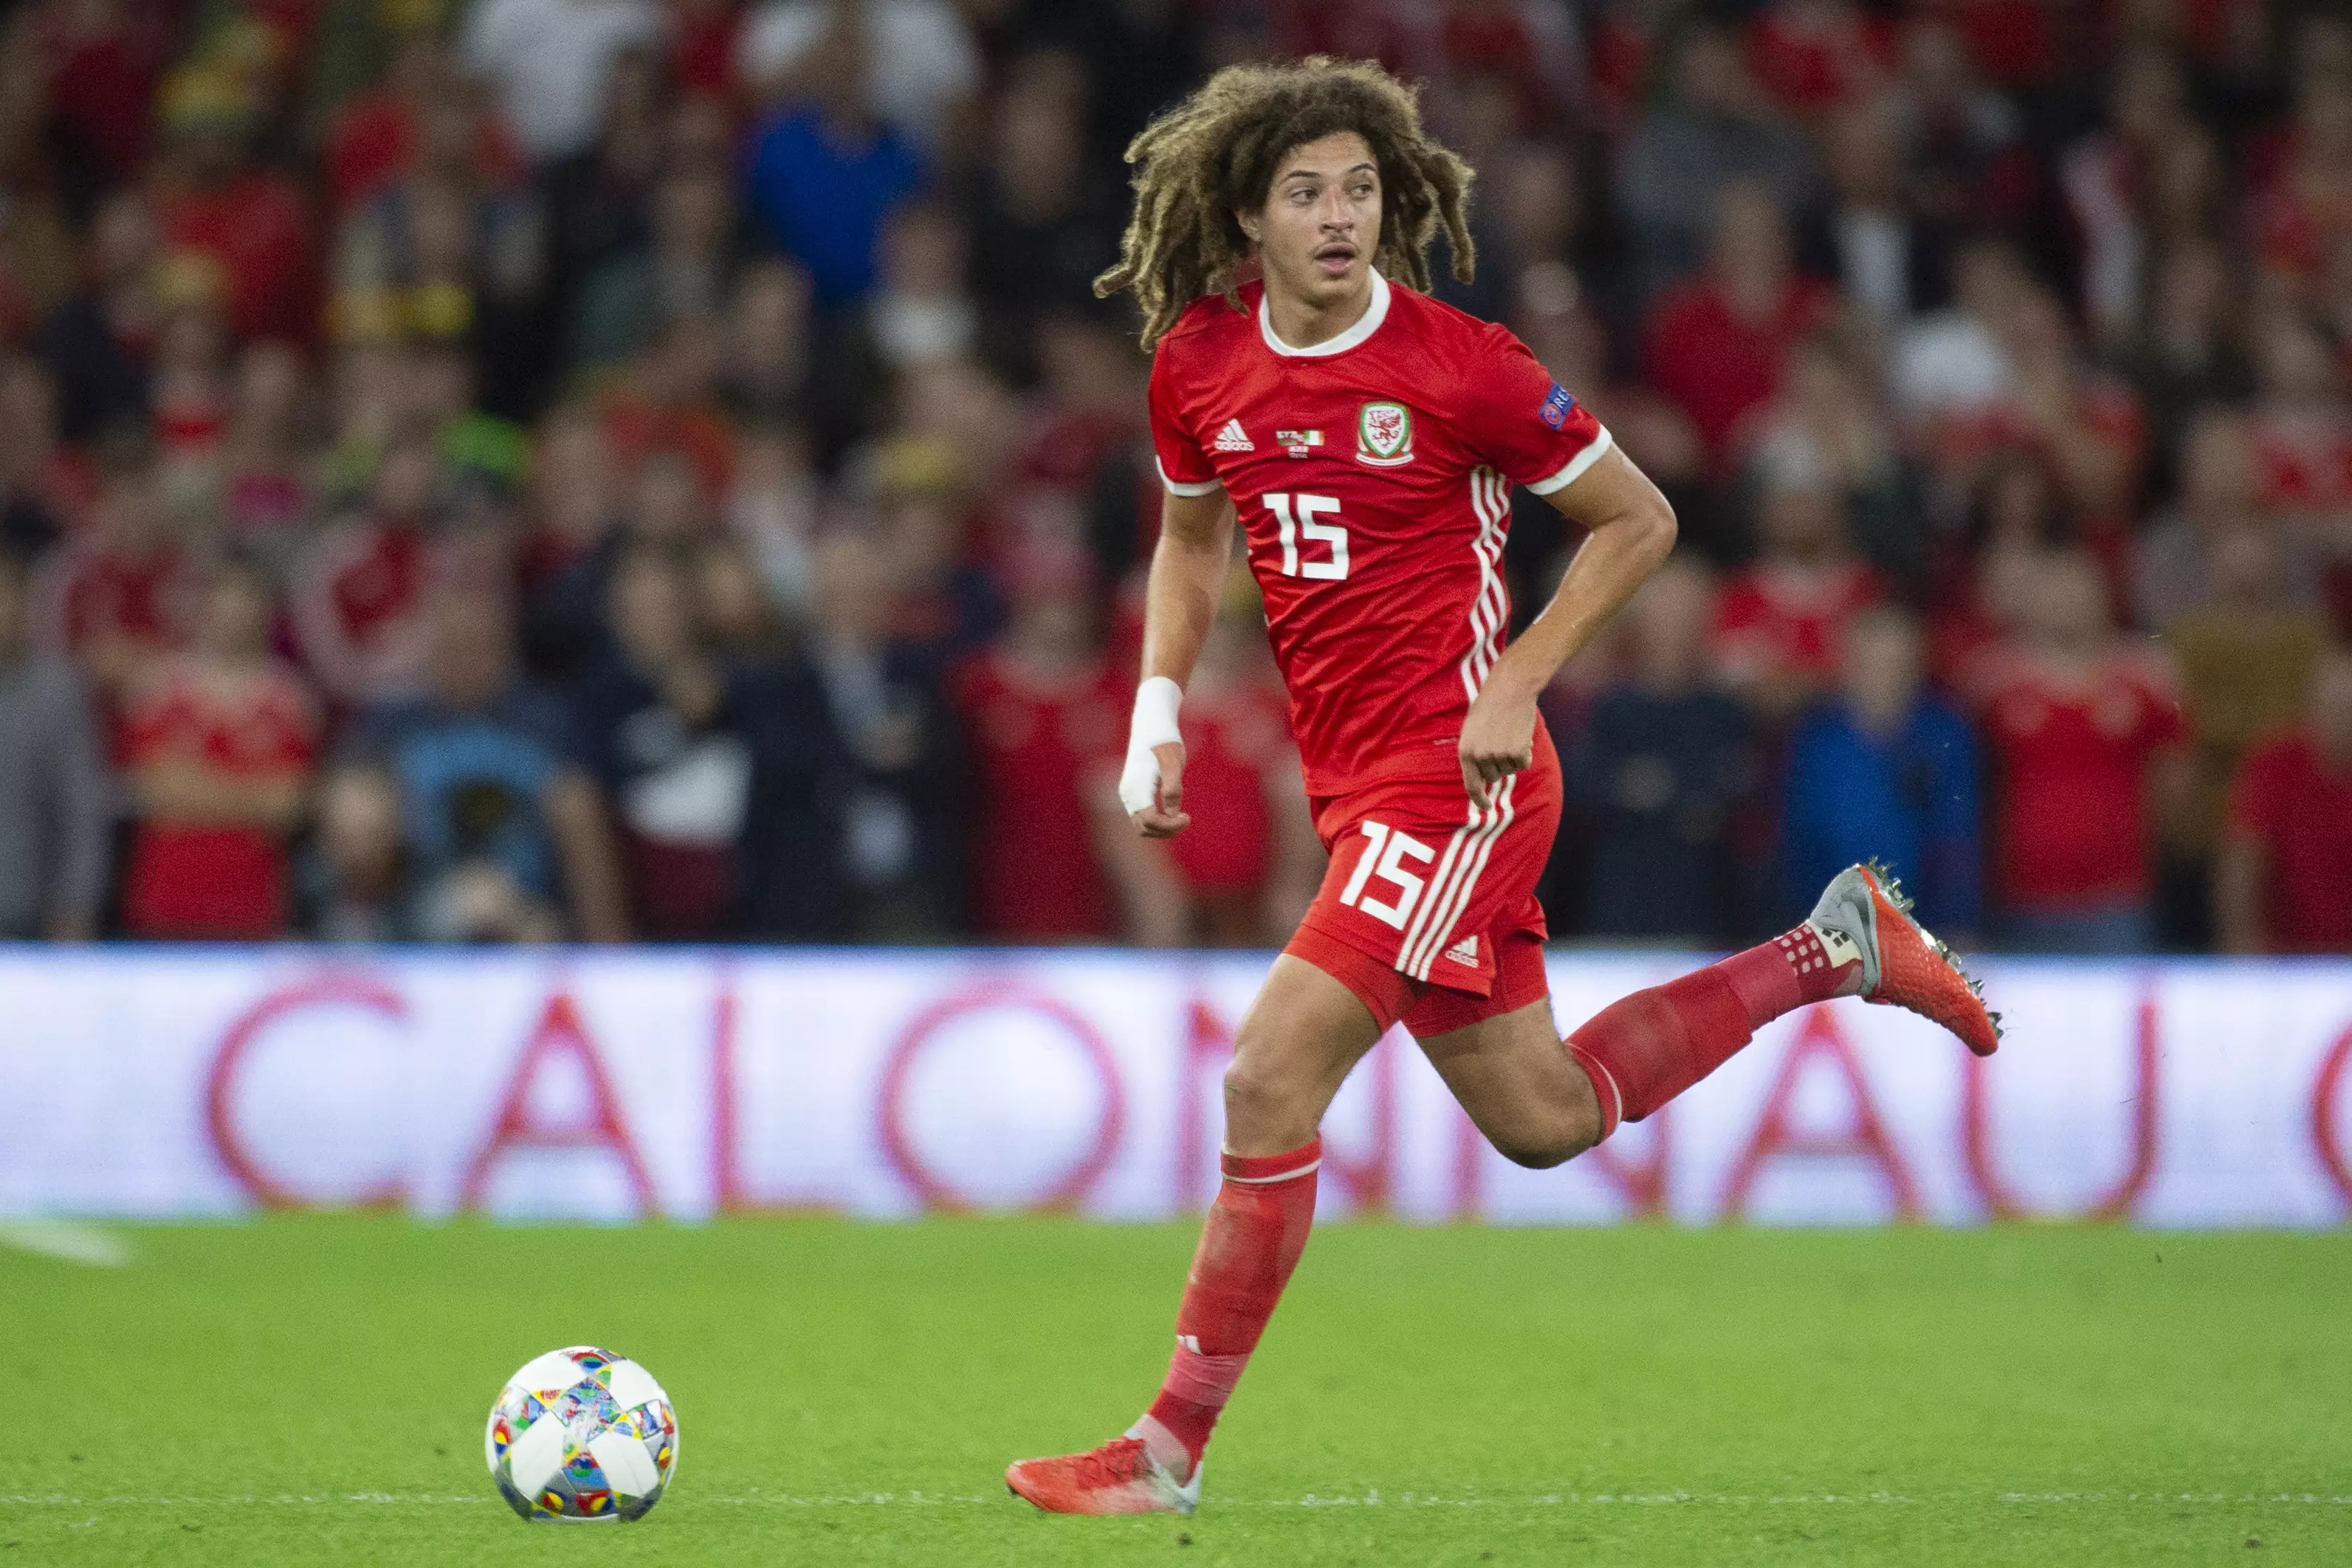 Ampadu was excellent in the game against Ireland. Image: PA Images